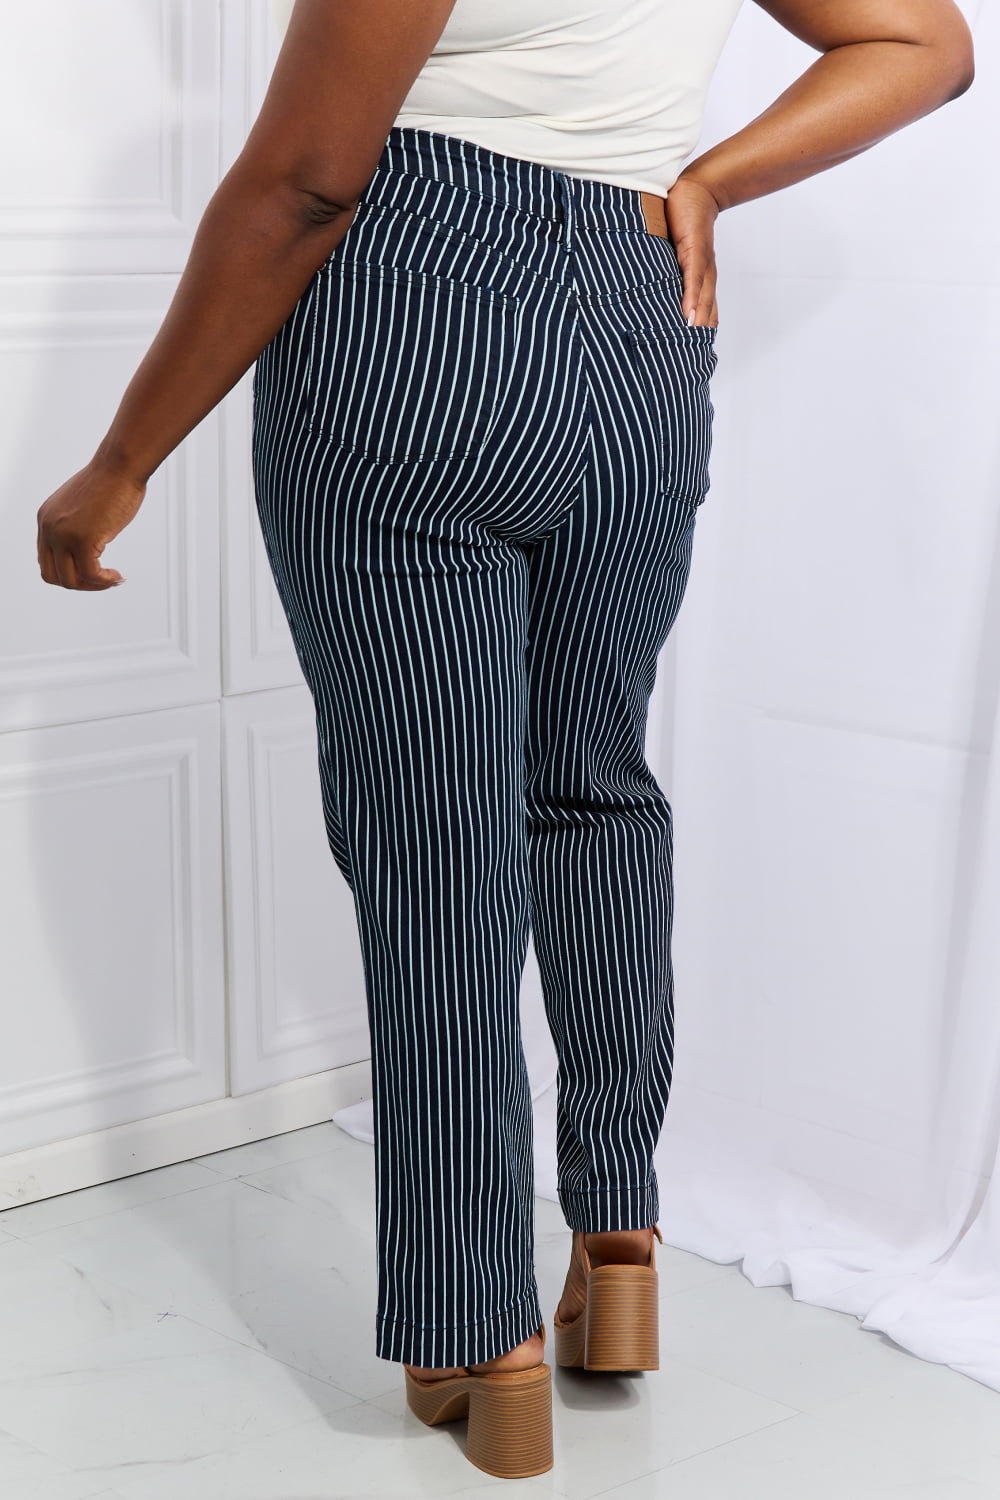 Express High Waisted Striped Sash Tie Ankle Pants 14 | eBay